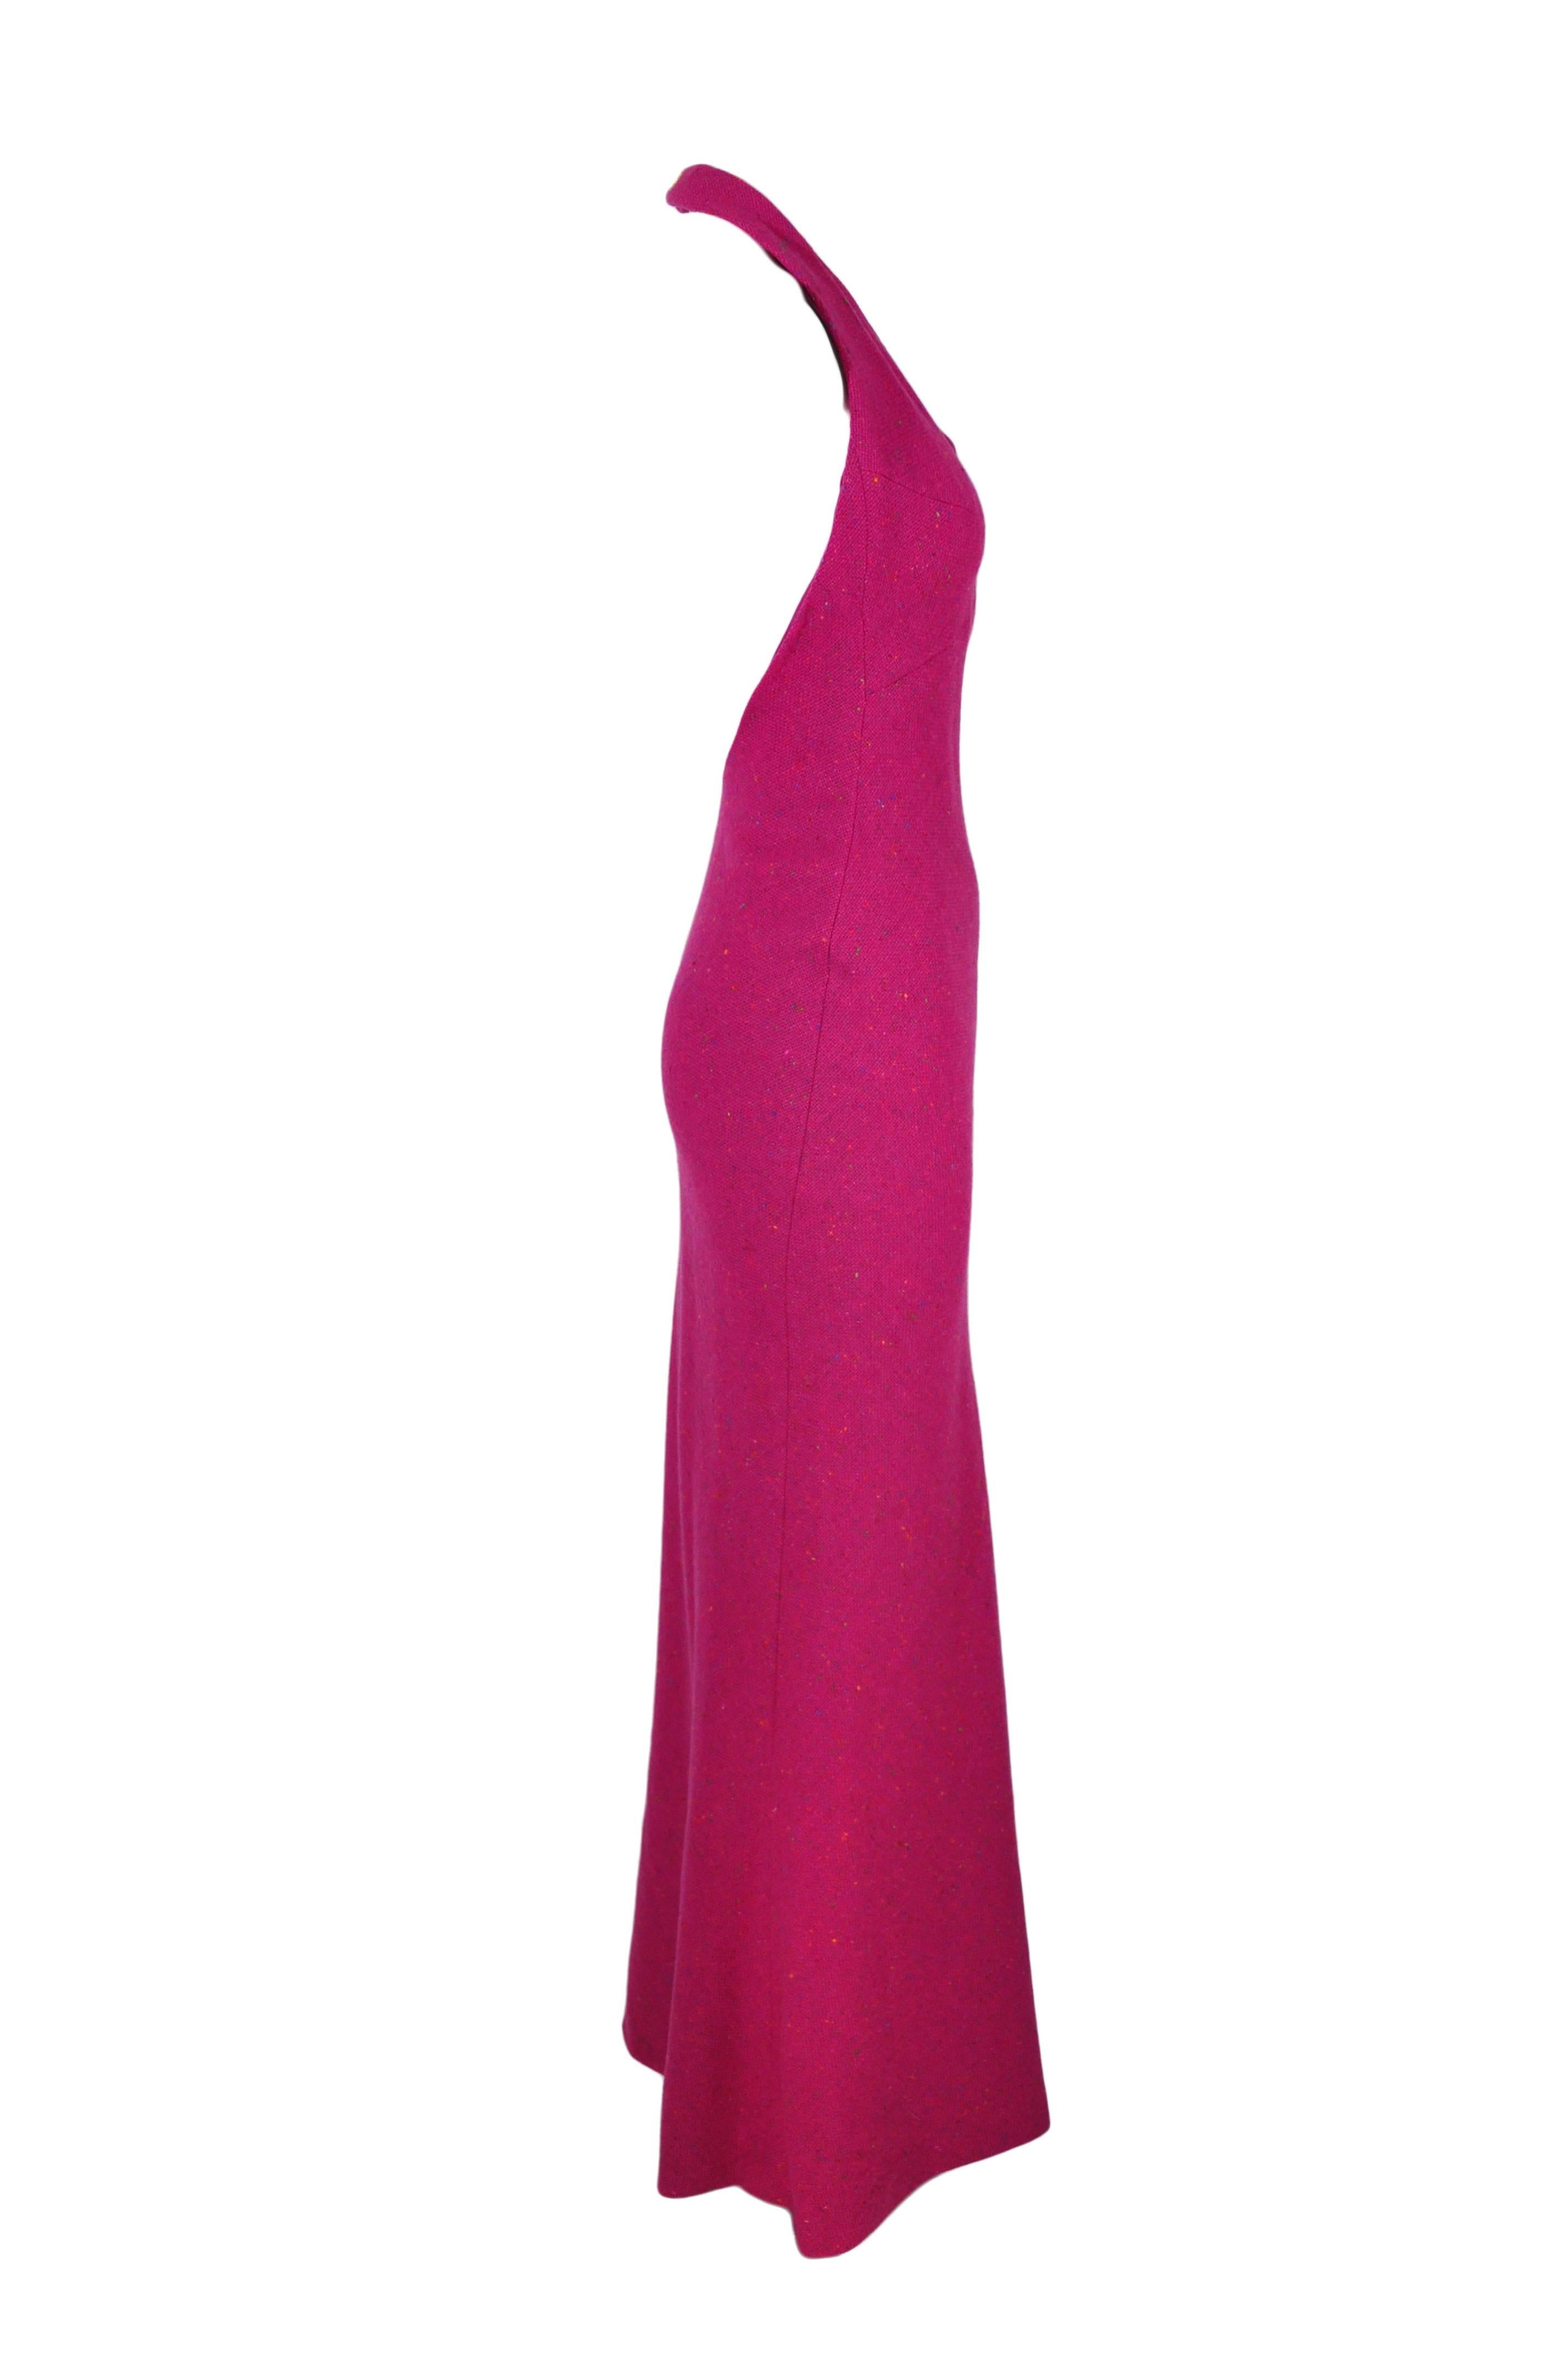 Christian Dior Halter Low Back Fuchsia Tweed Maxi Dress In Excellent Condition For Sale In Hong Kong, Hong Kong